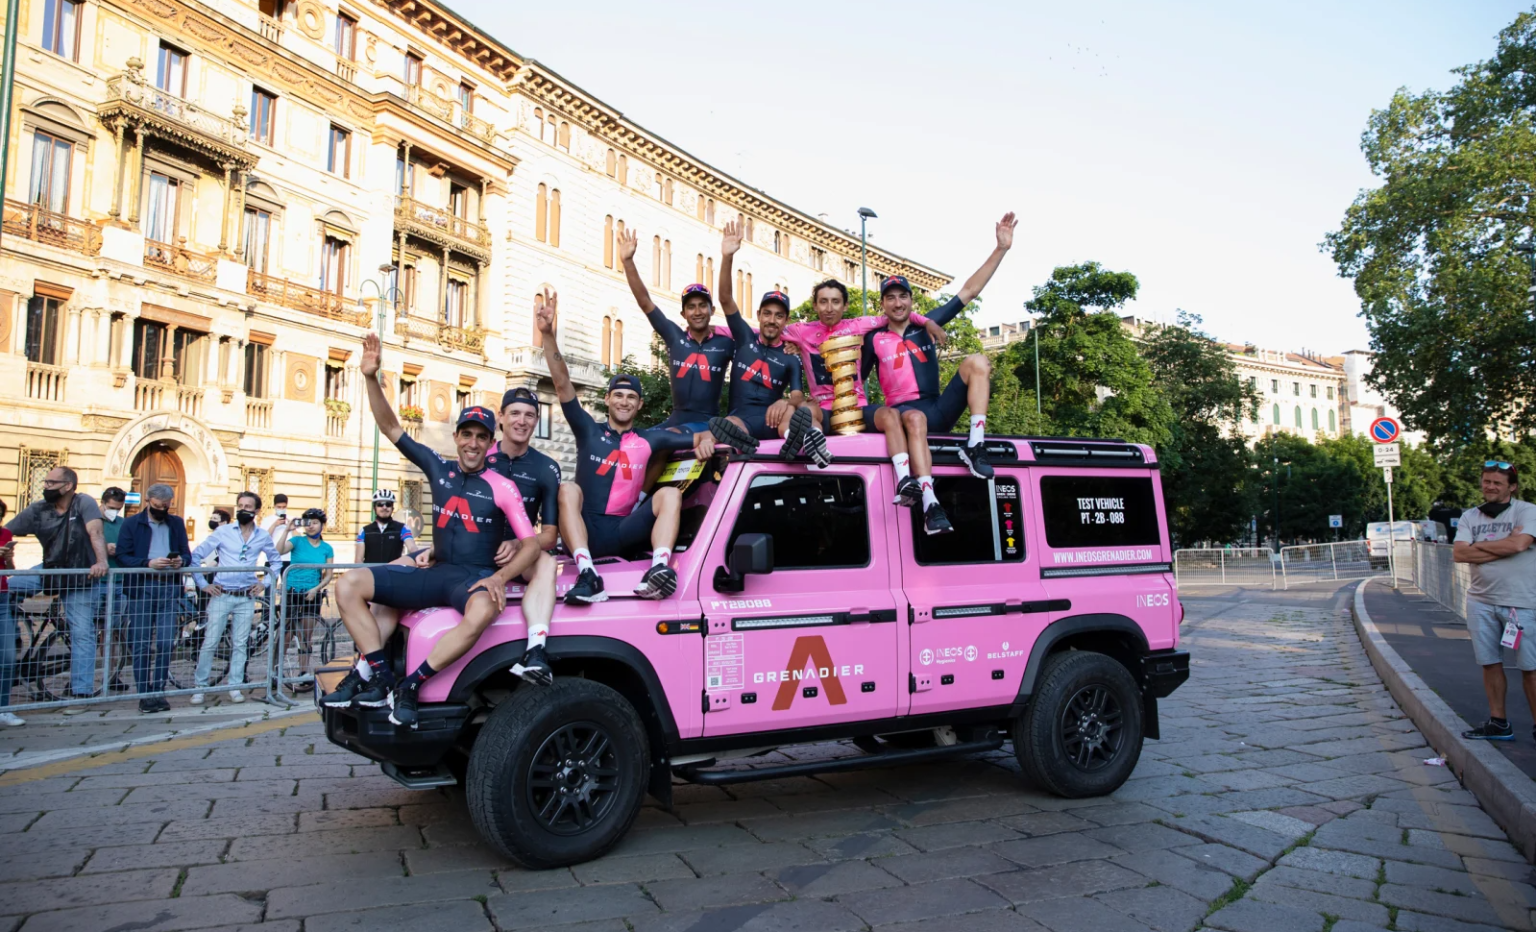 Seven Ineos Grenadiers cyclists sit atop a hot pink Ineos Grenadier vehicle in Rome. They are celebrating Egan Bernal's Giro d'Italia victory, and Bernal, in his matching pink jersey, sits in the center of the image atop the truck with the Giro's spiral-shaped trophy.